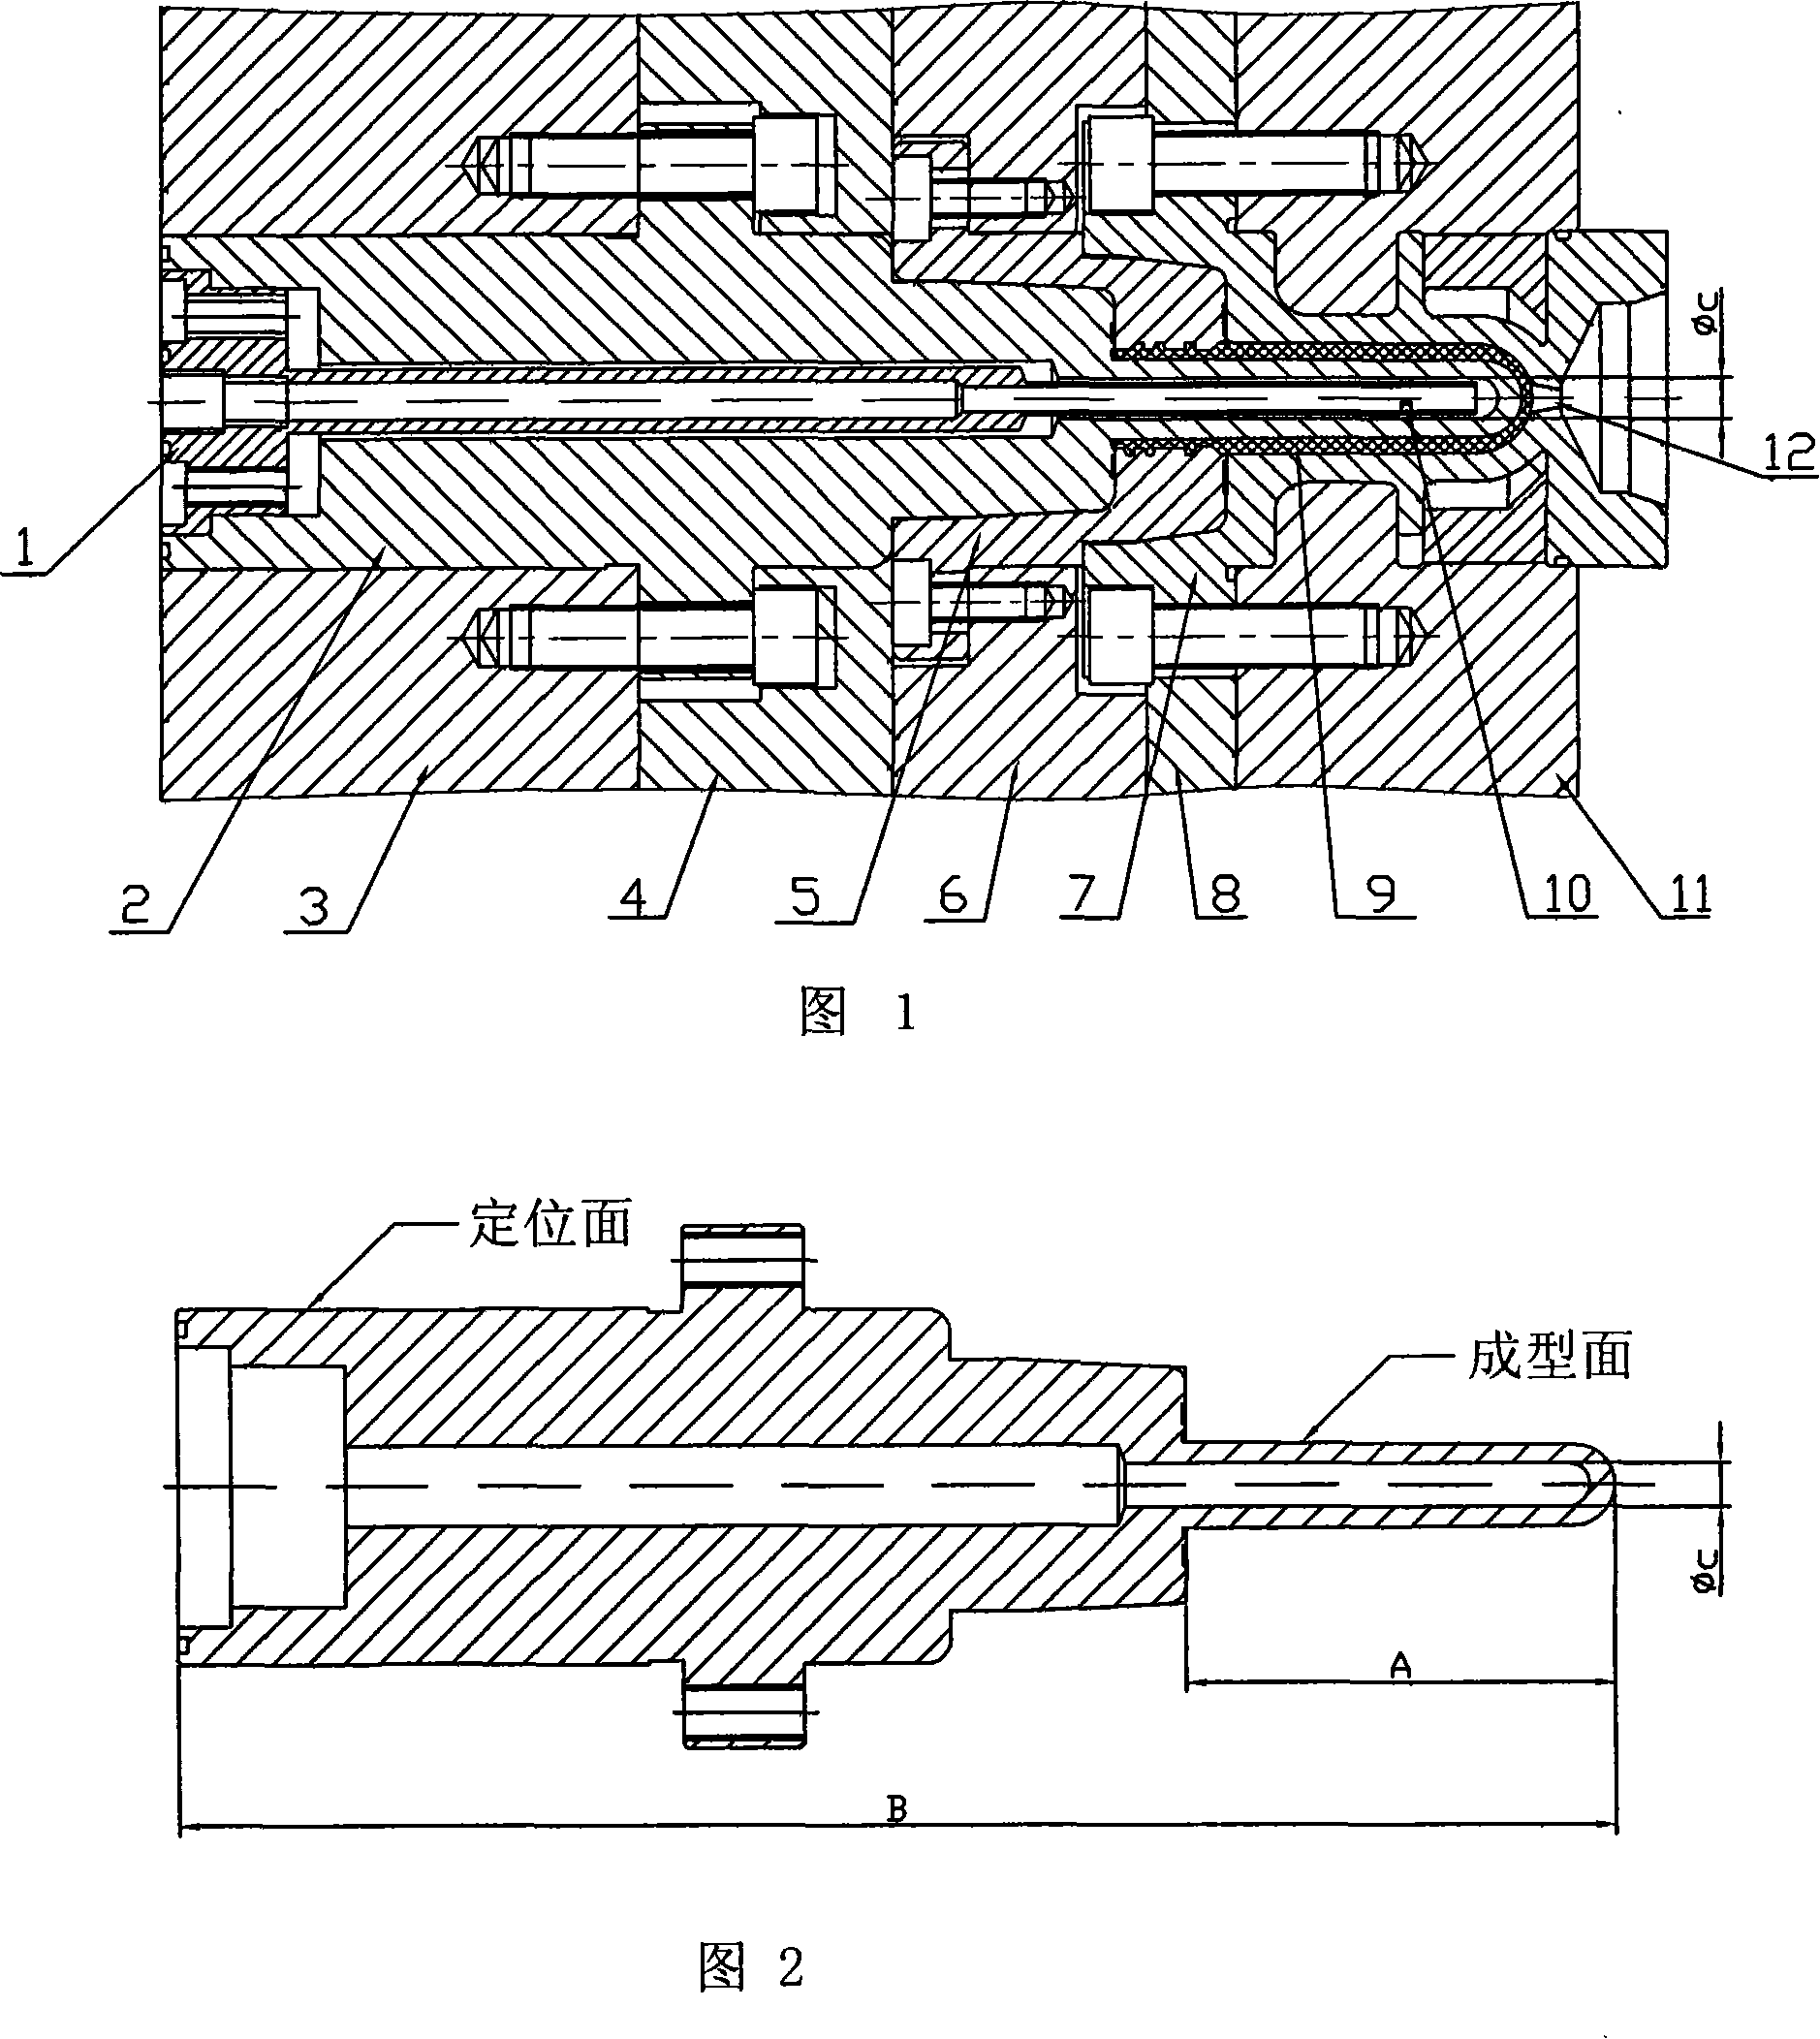 Method for ensuring the axiality of the injection molding cooling deep borehole and the external-molding surface